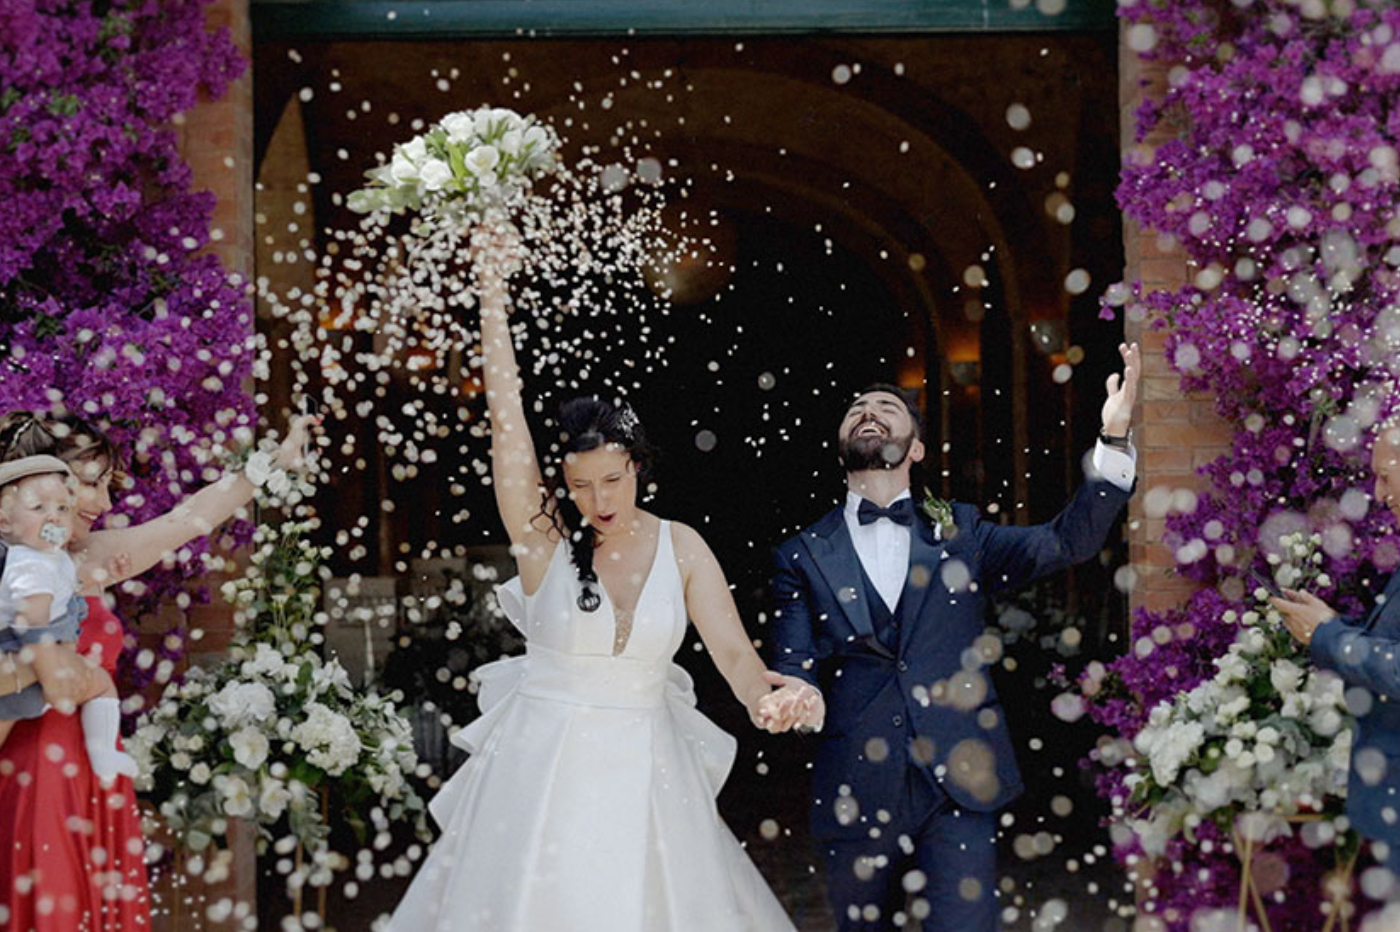 Capturing Forever: The Art of Wedding Reception Videography